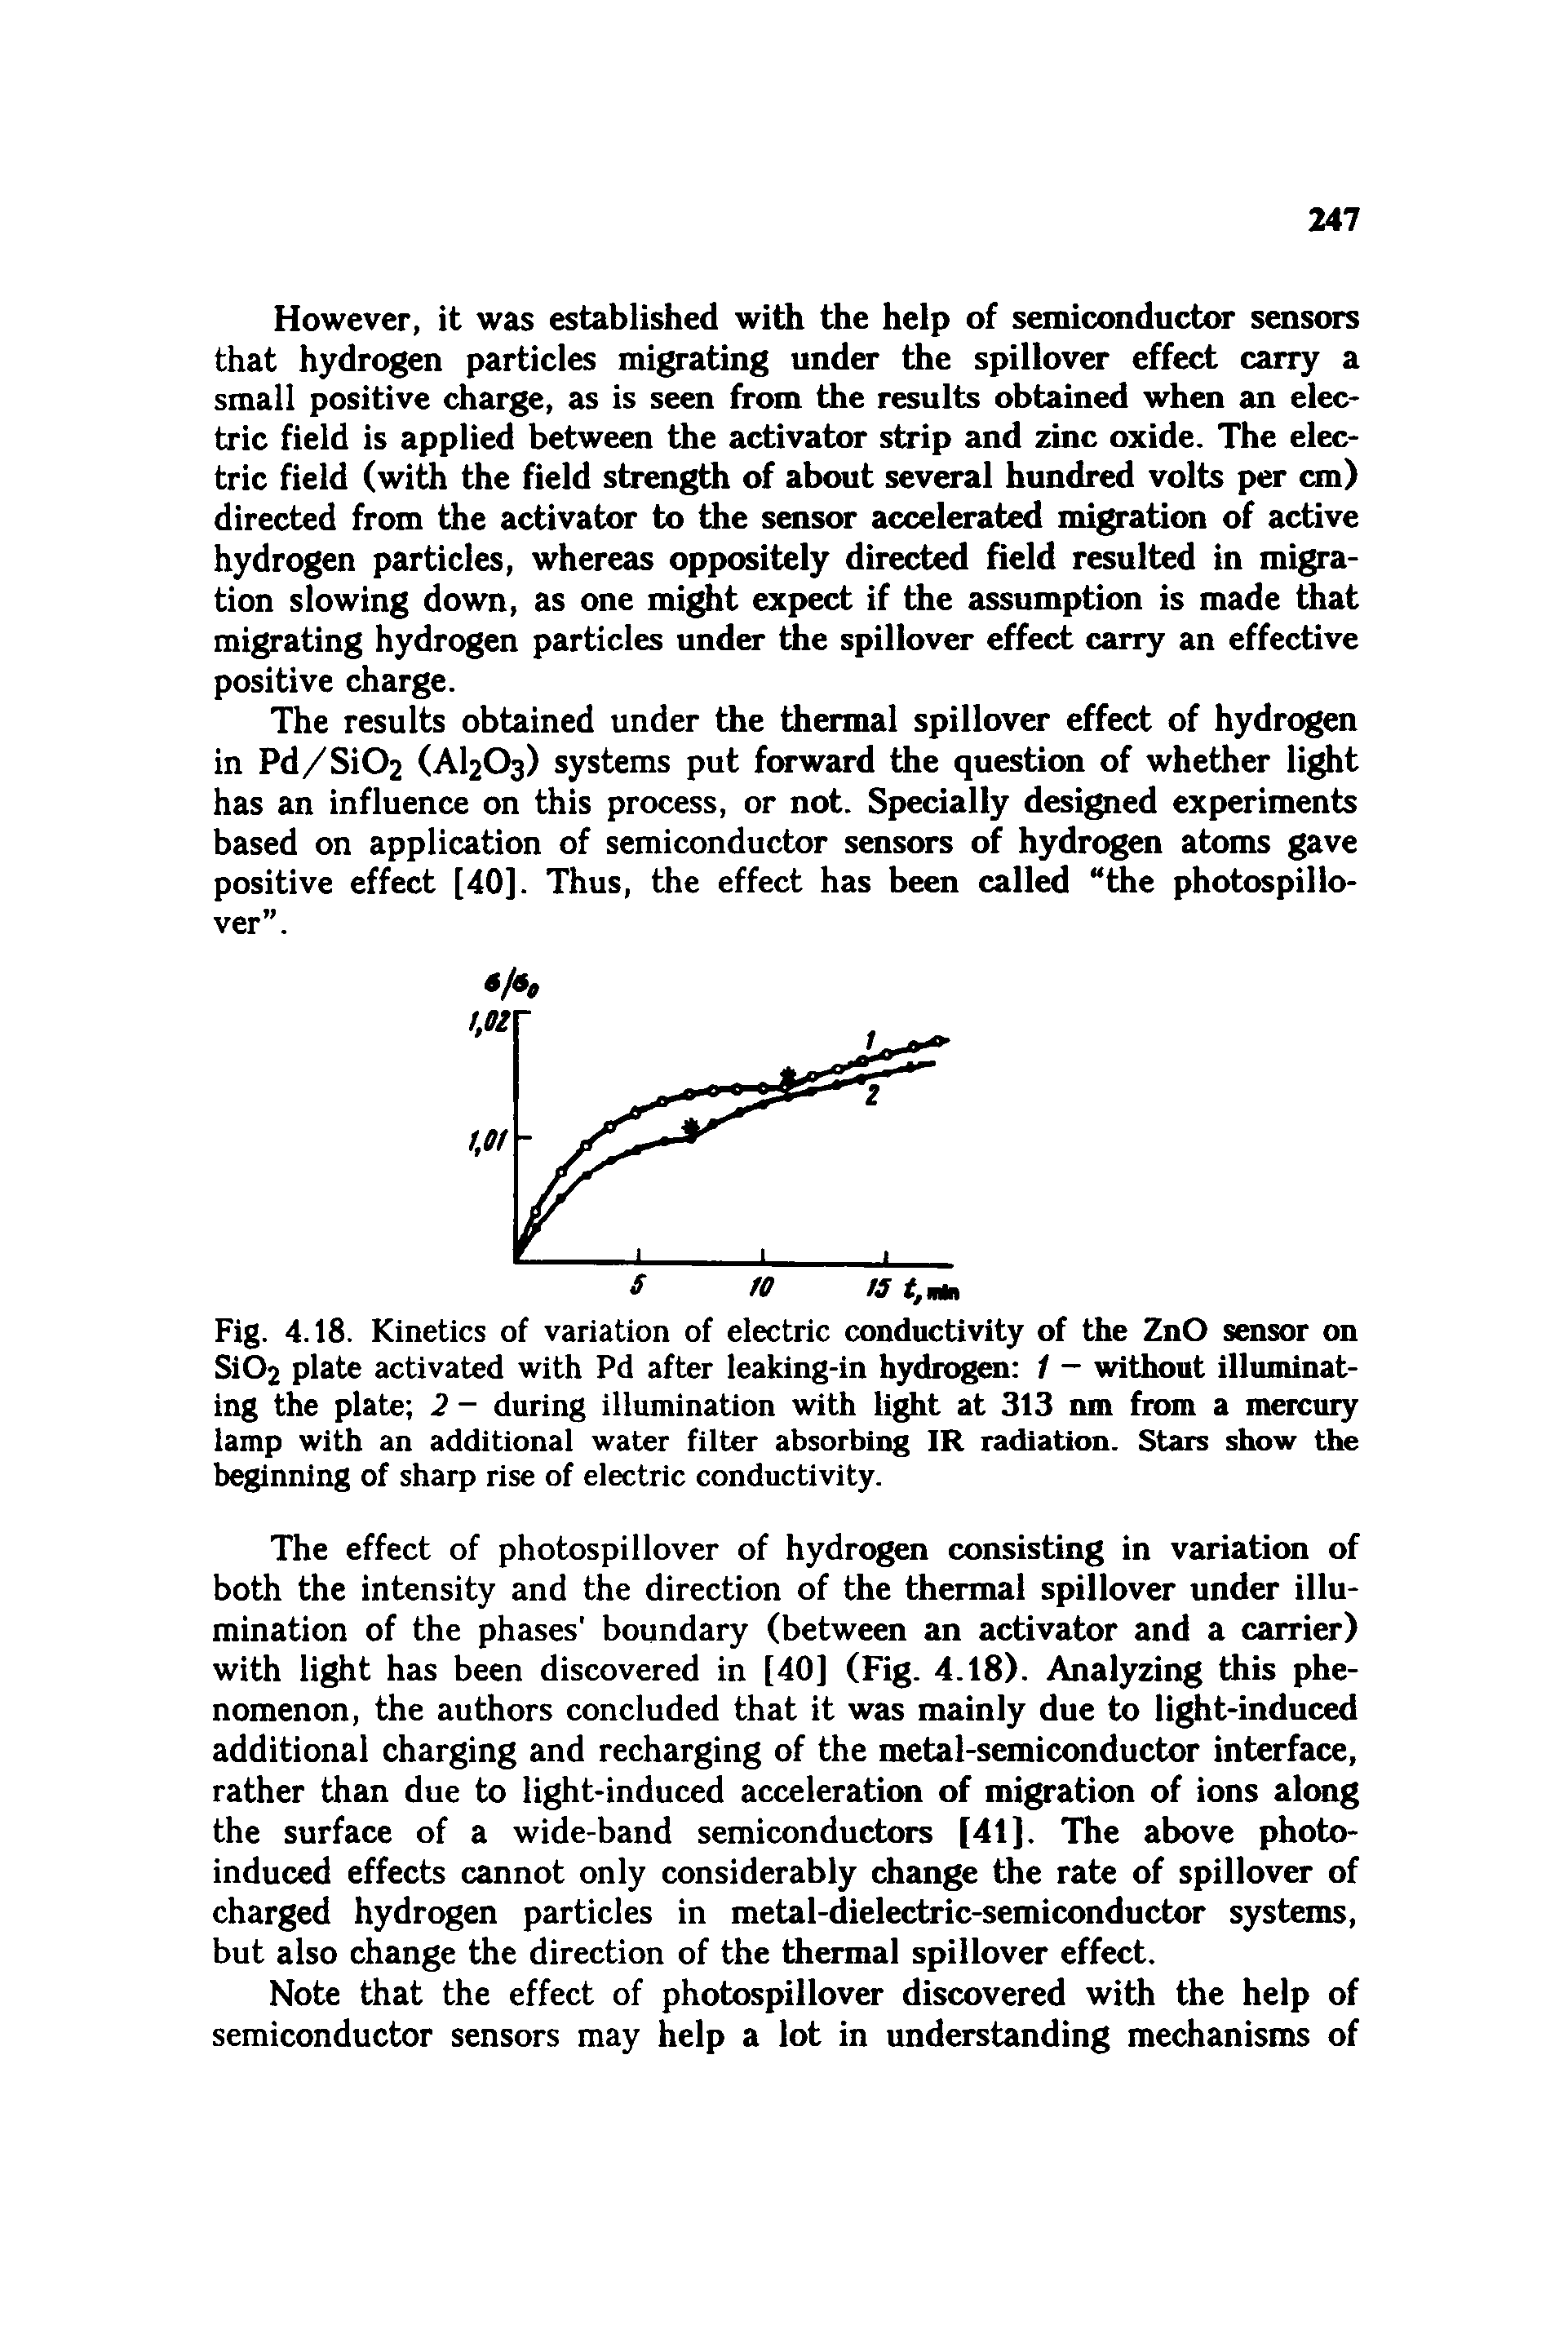 Fig. 4.18. Kinetics of variation of electric conductivity of the ZnO sensor on Si02 plate activated with Pd after leaking-in hydrogen 1 - without illuminating the plate 2 - during illumination with light at 313 nm from a mercury lamp with an additional water filter absorbing IR radiation. Stars show the beginning of sharp rise of electric conductivity.